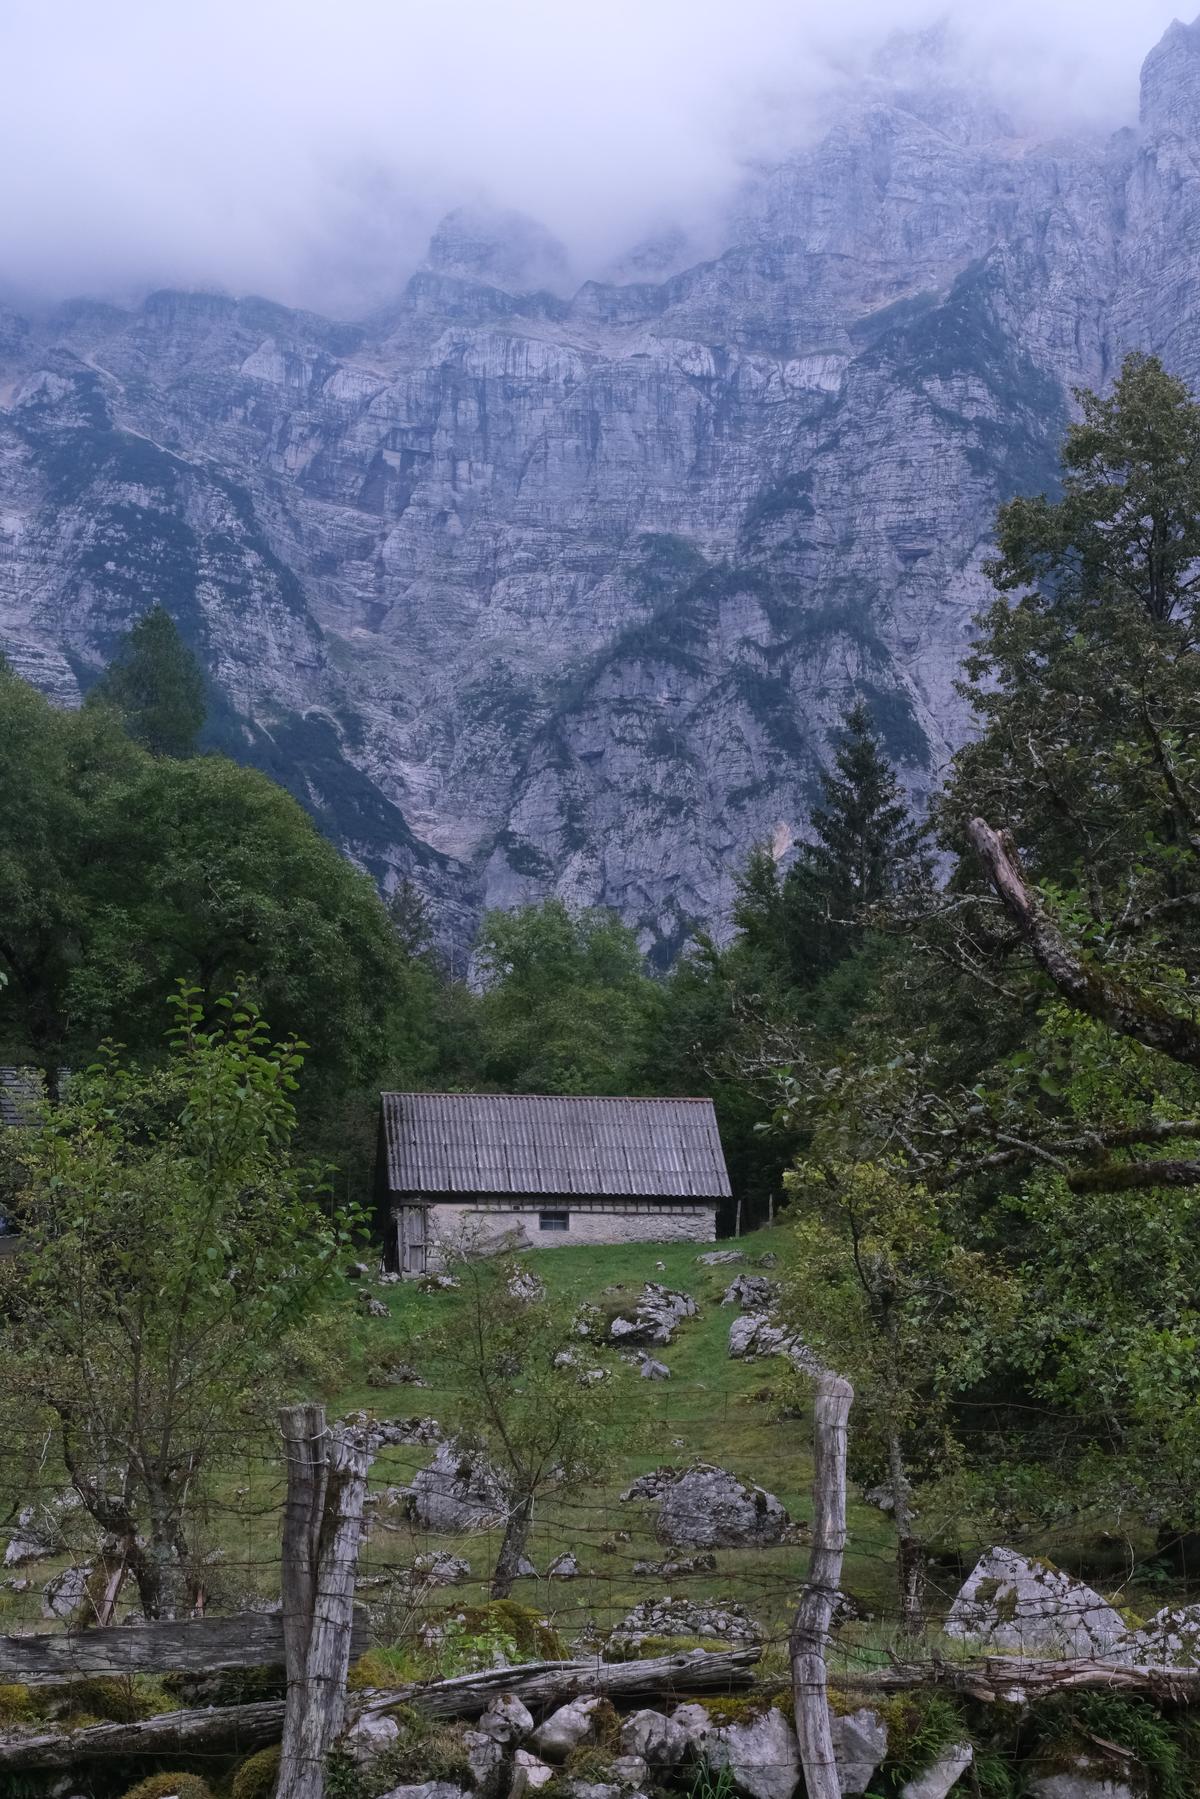 A stone outhouse nestled in the trees behind a barbed wire fence. Behind, the Slovenian Alps reach up into the clouds. 